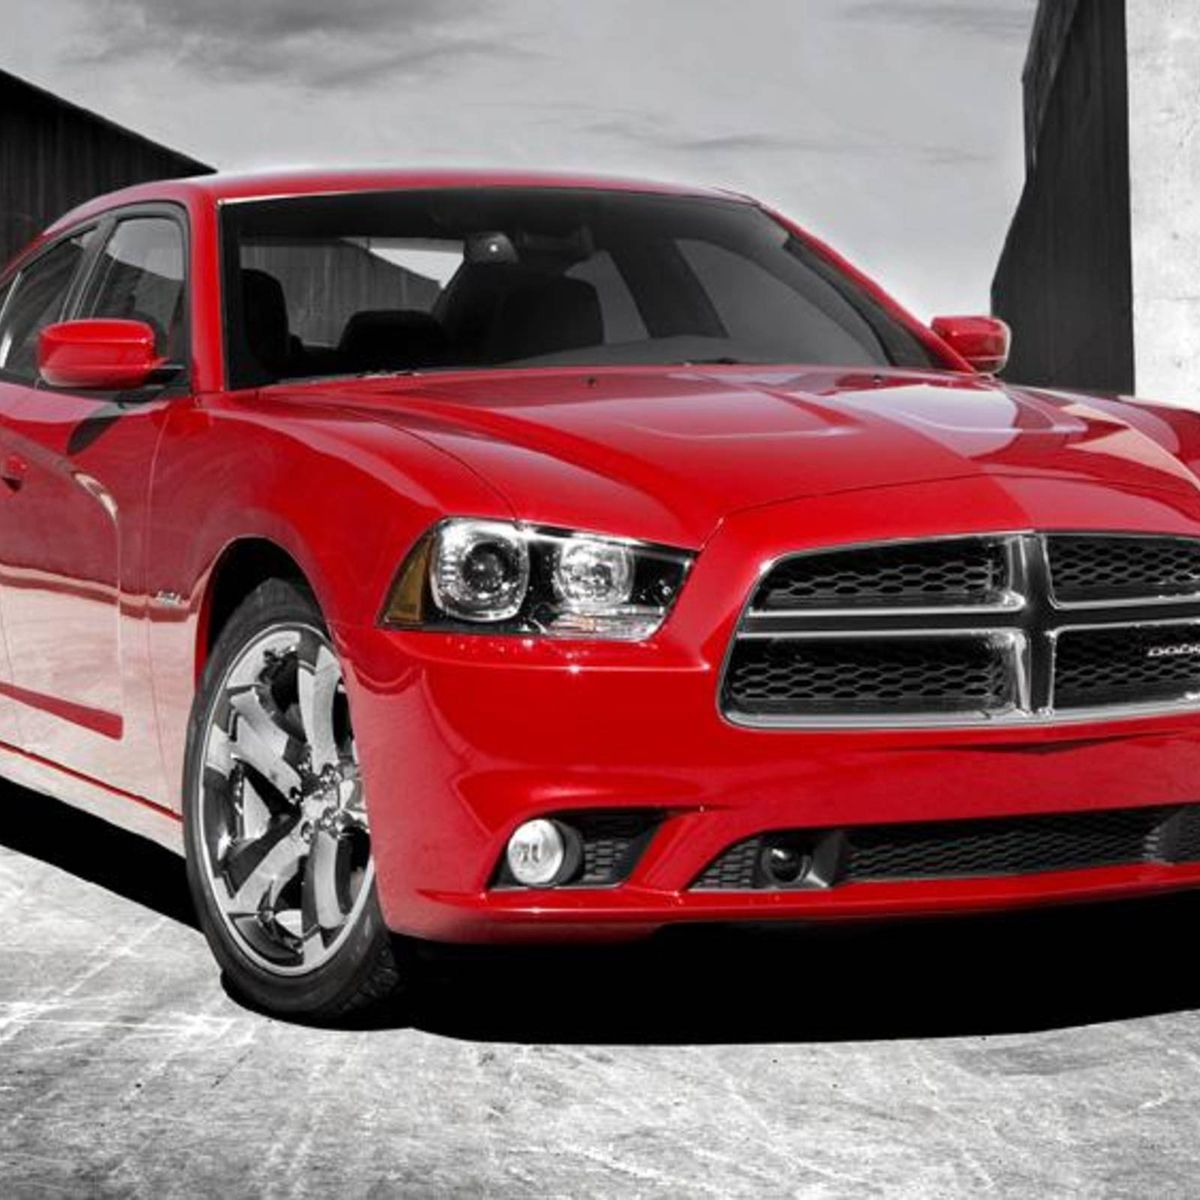 2011 Dodge Charger revealed